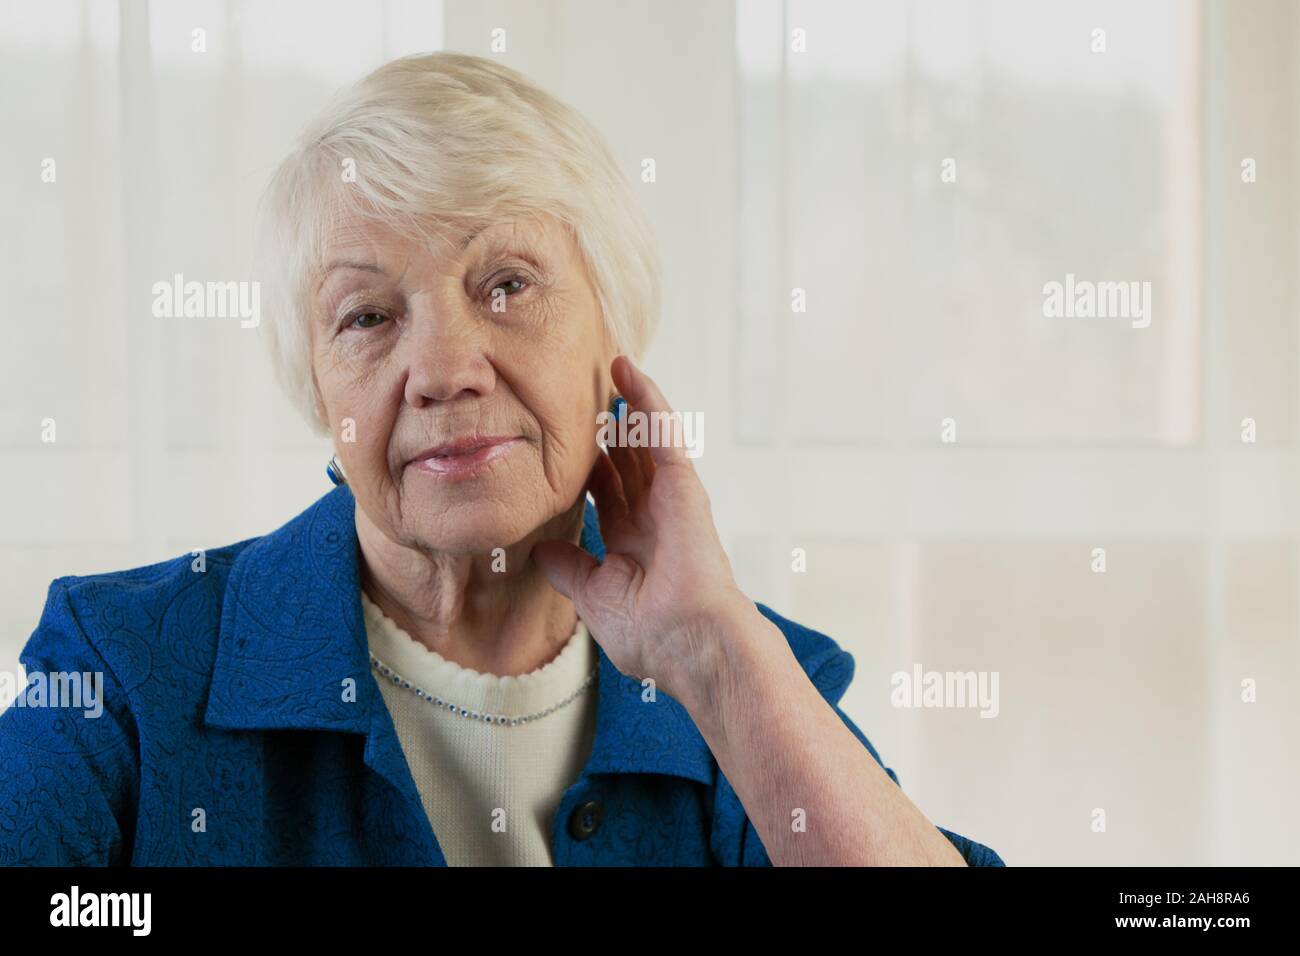 Beautiful senior woman looking at the camera with a warm friendly smile and attentive expression Stock Photo